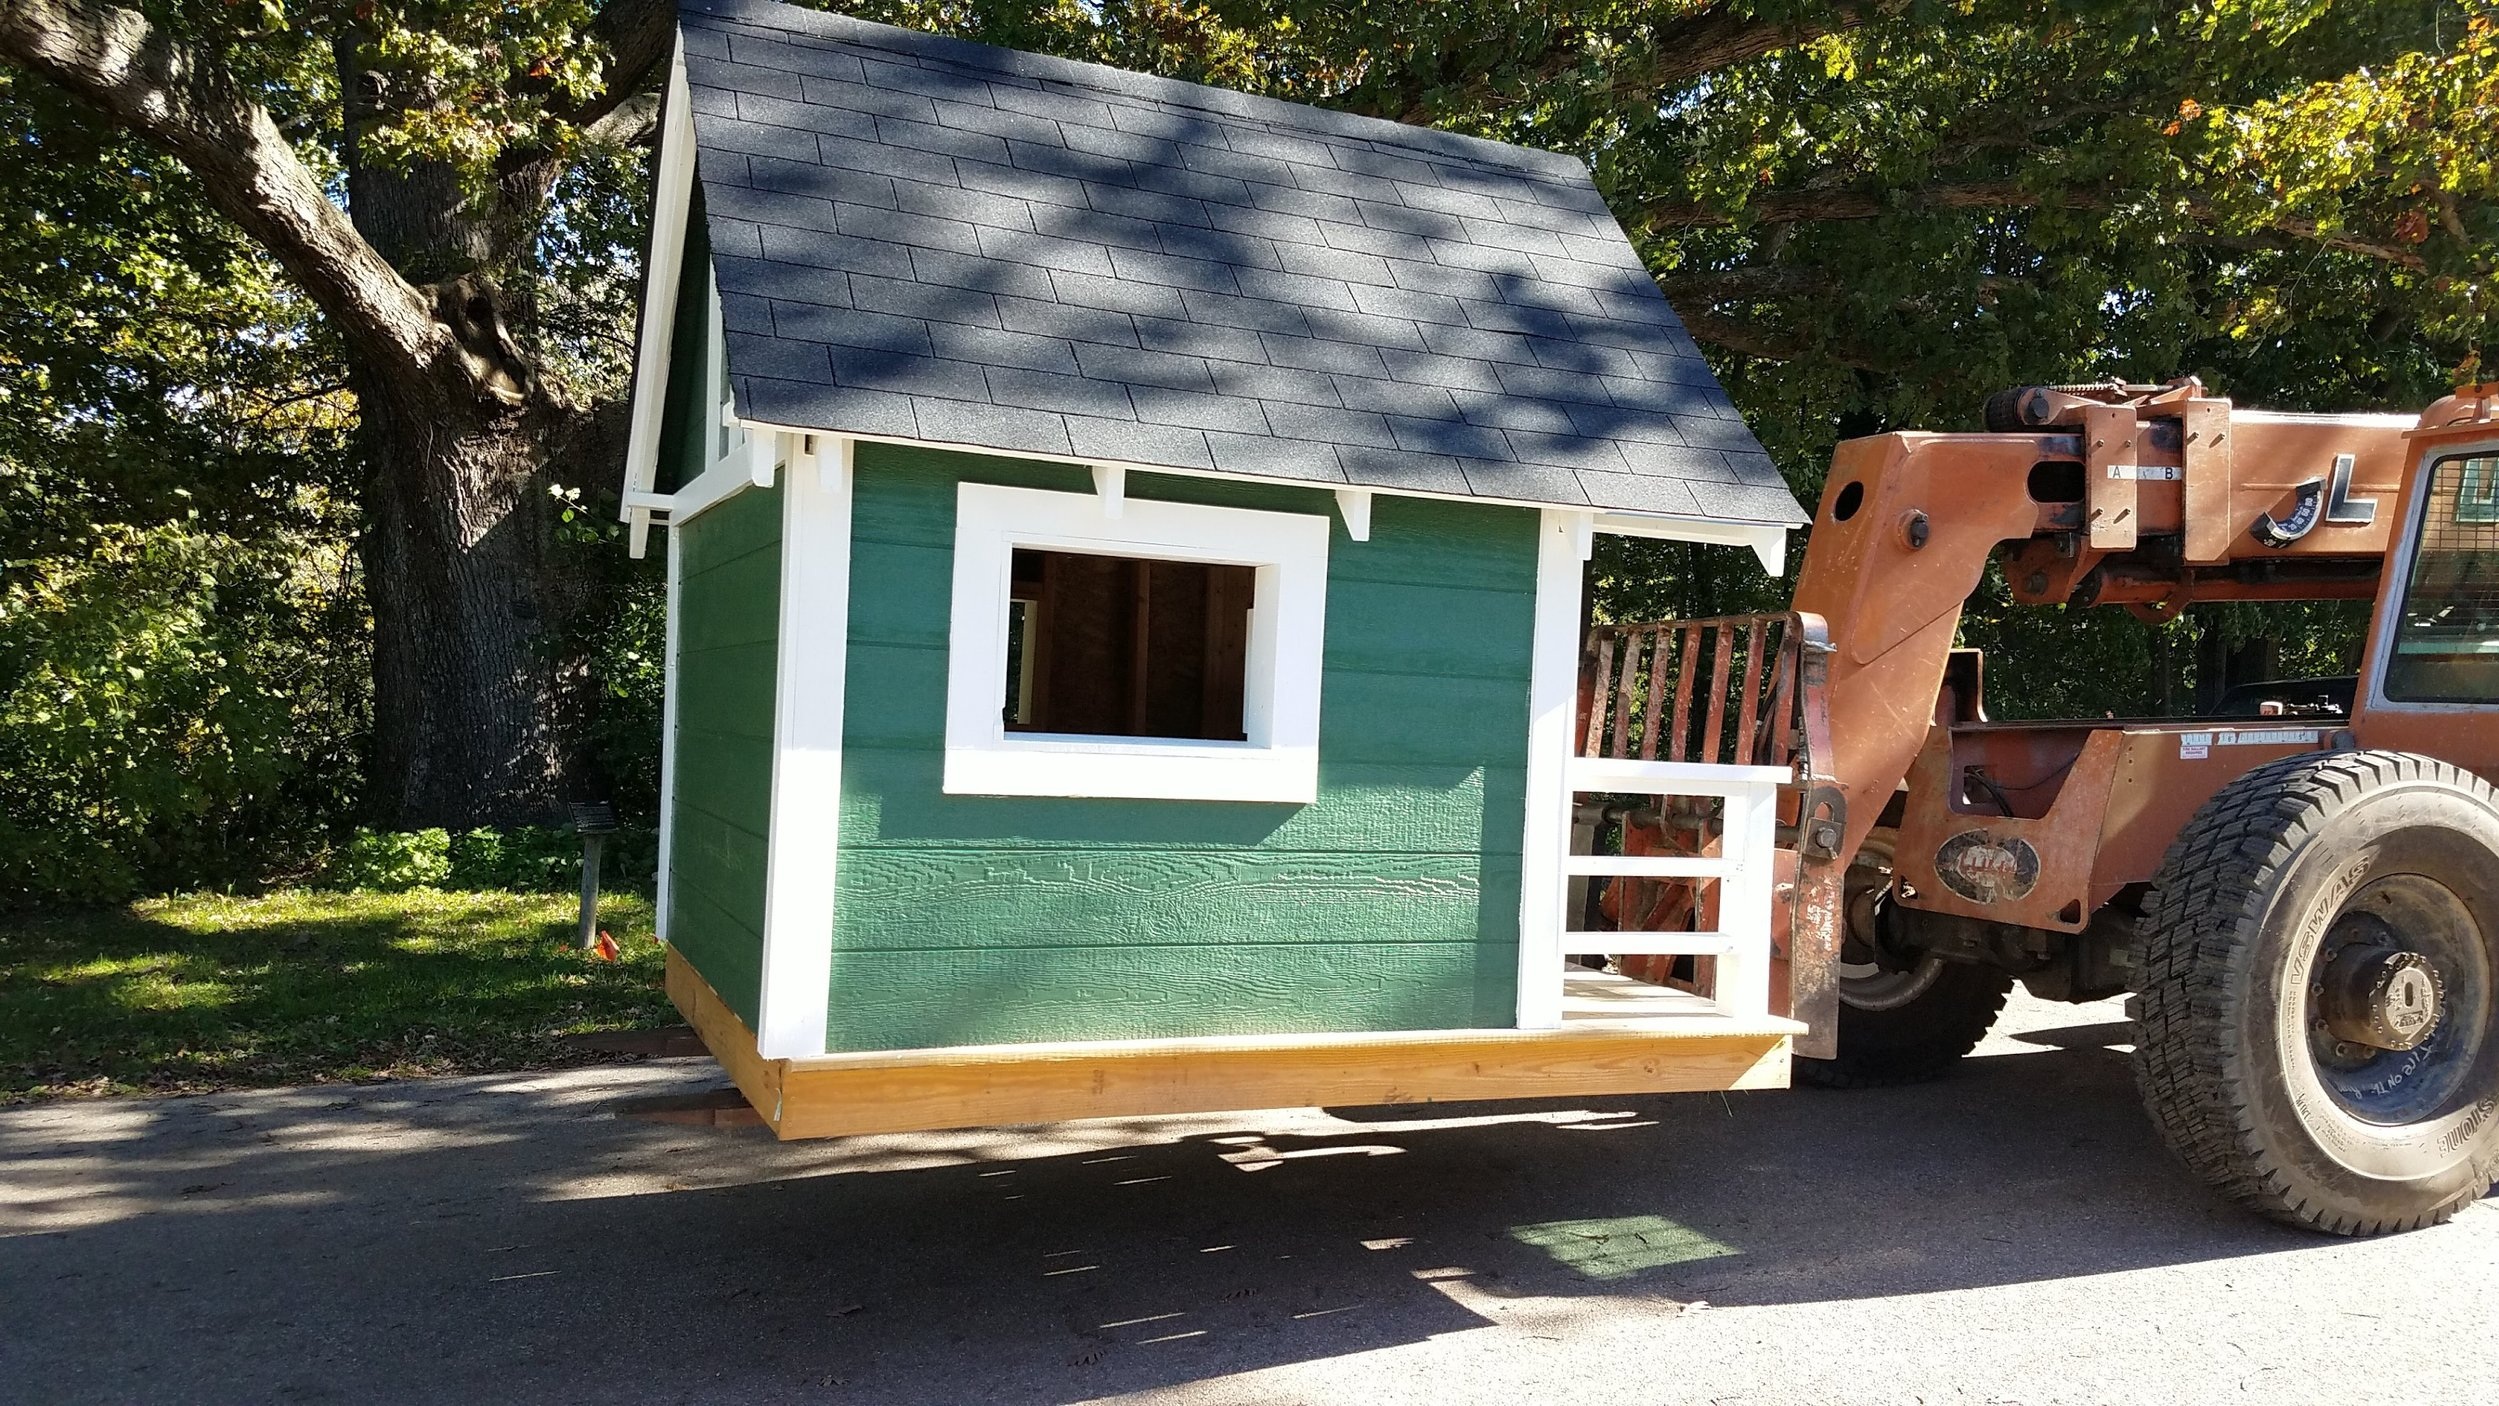 Built by the kids in 2019 to help raise money for building a tiny house for a stranger in need. (Copy)